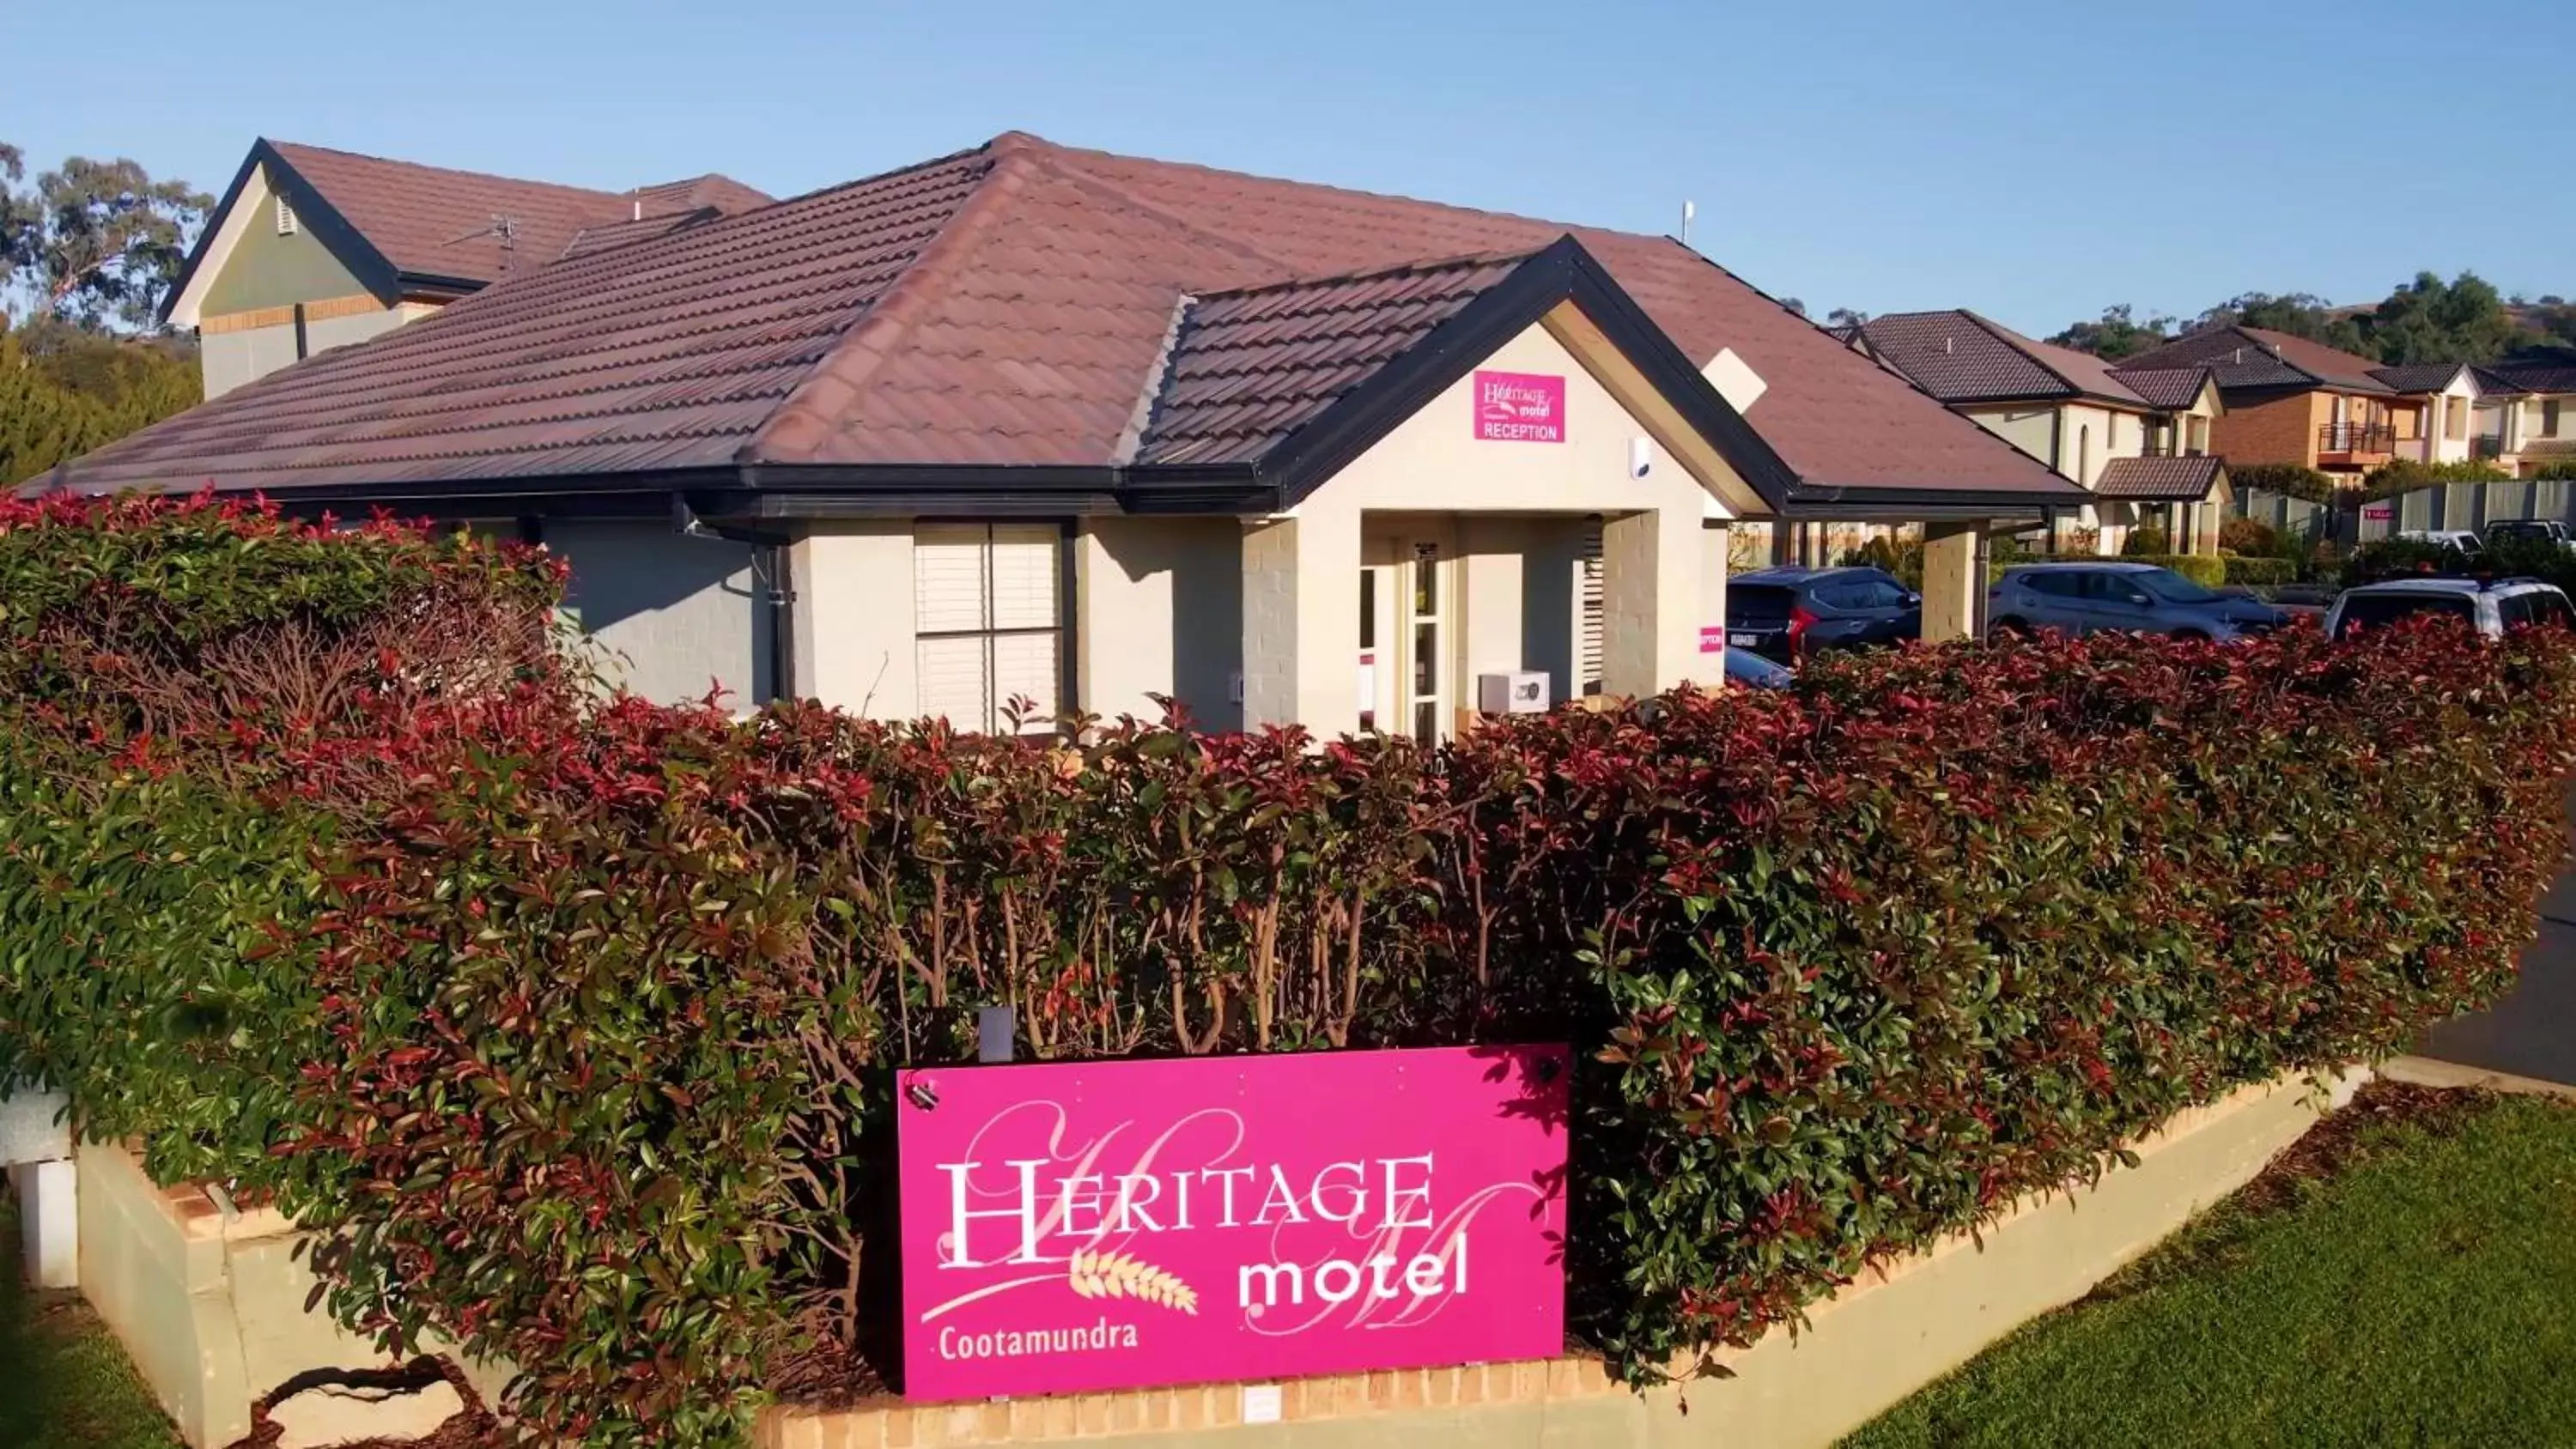 Property Building in Cootamundra Heritage Motel & Apartments